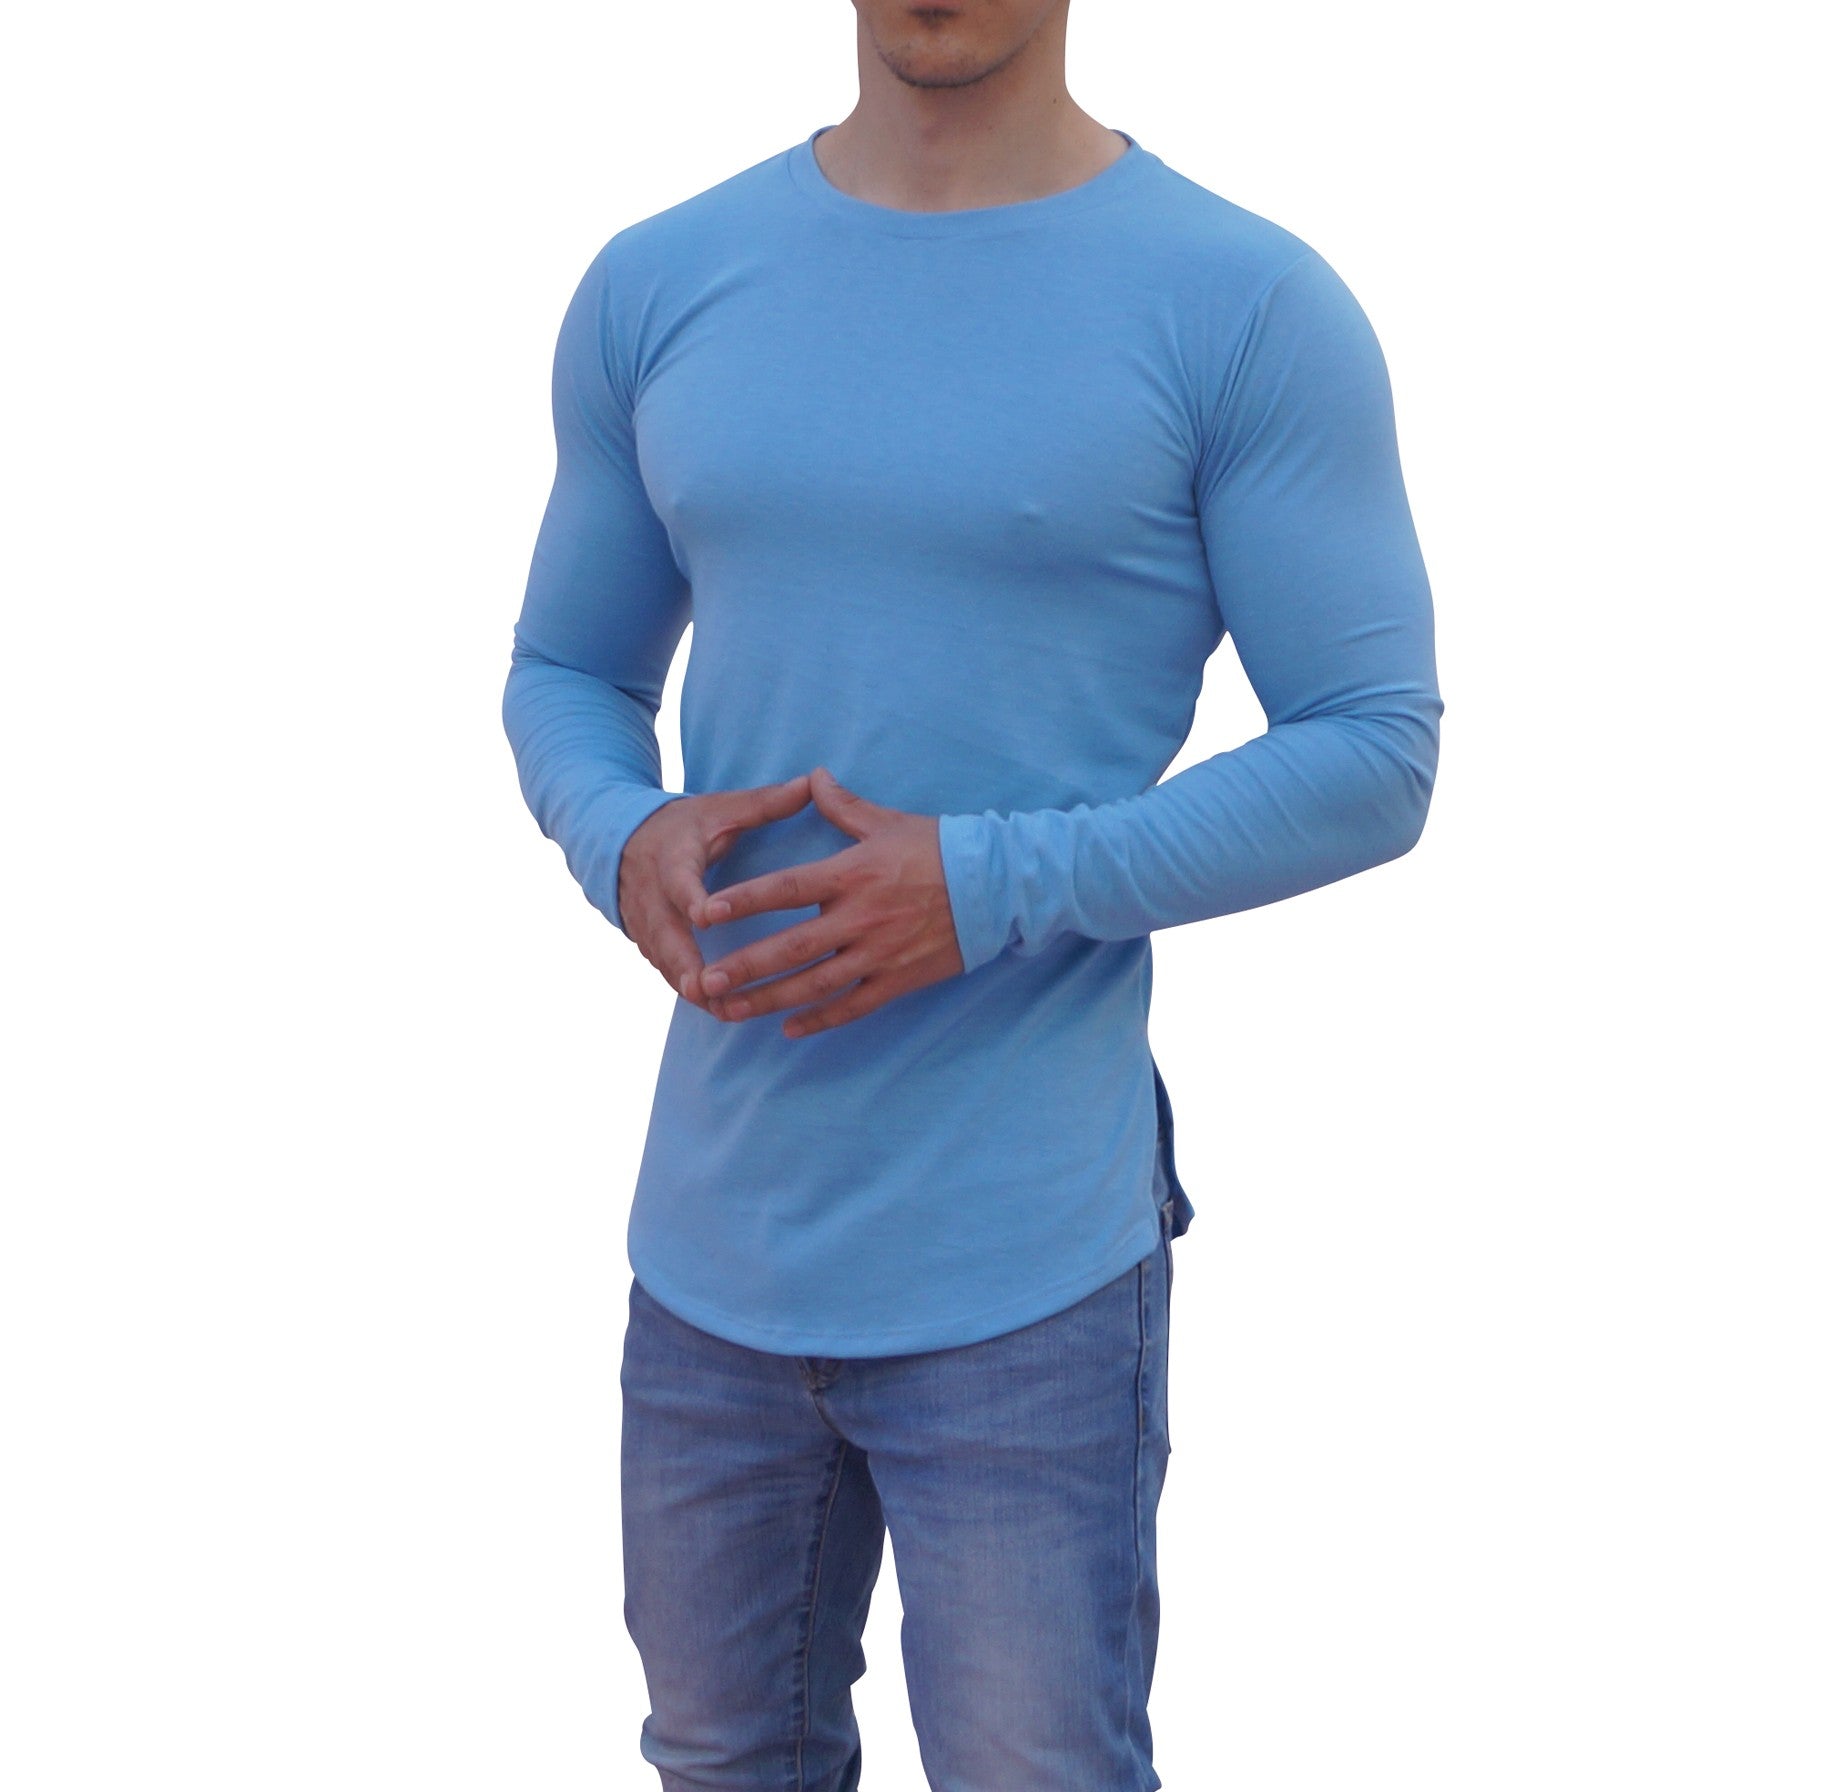 Light Blue Round Neck Long Sleeve T-shirt With Opening